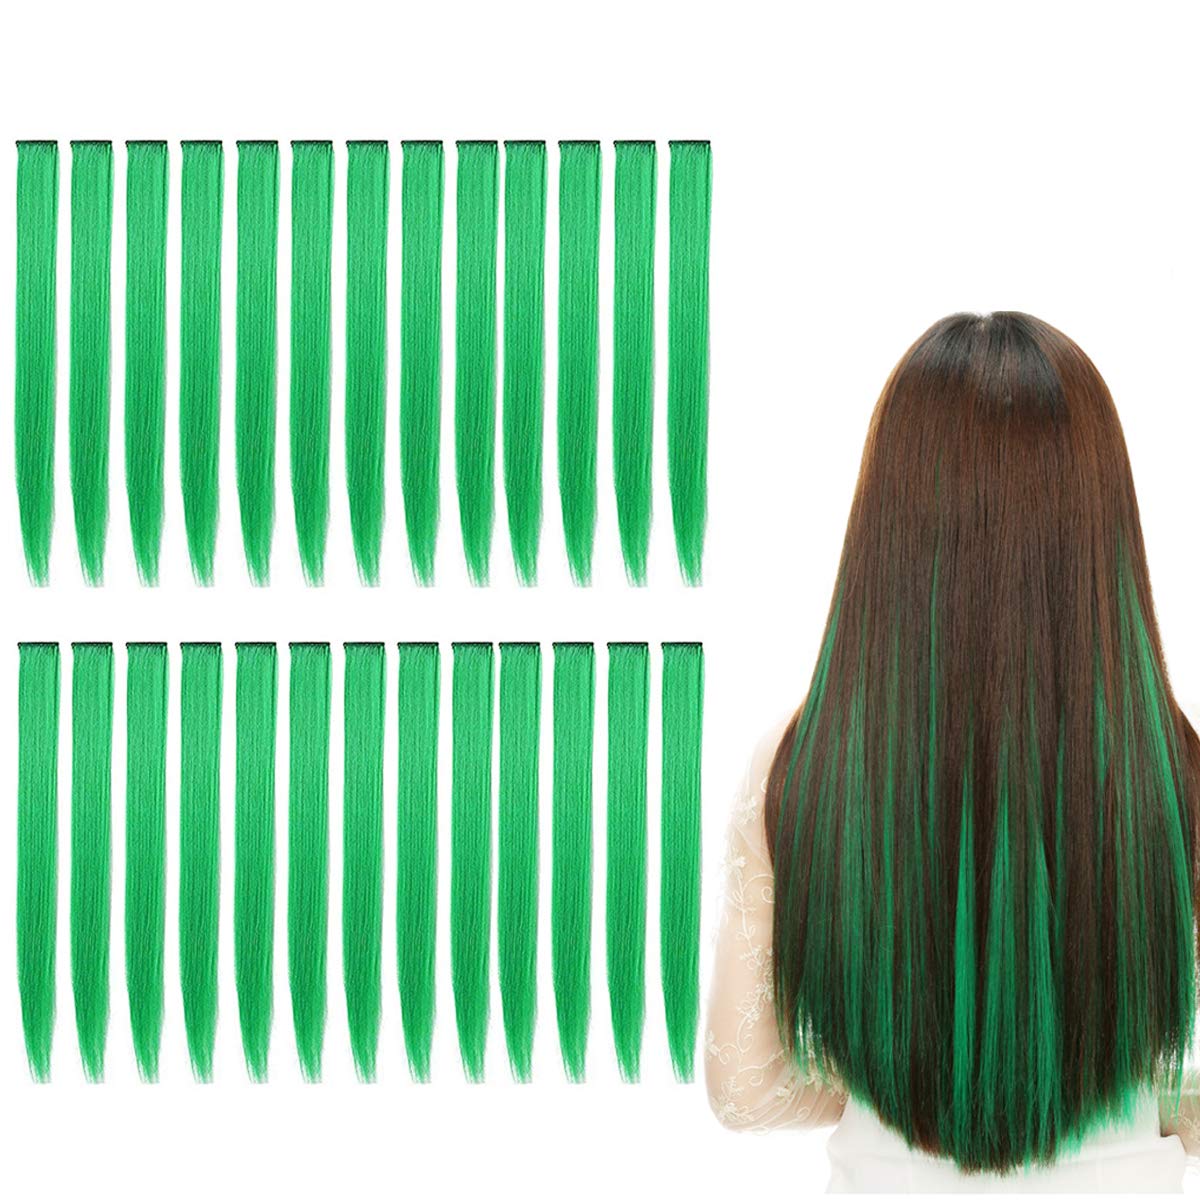 24pcs Green Hair Extensions 20 inch Halloween Party Highlights Clip in Hair  Extensions for Girls Heat-